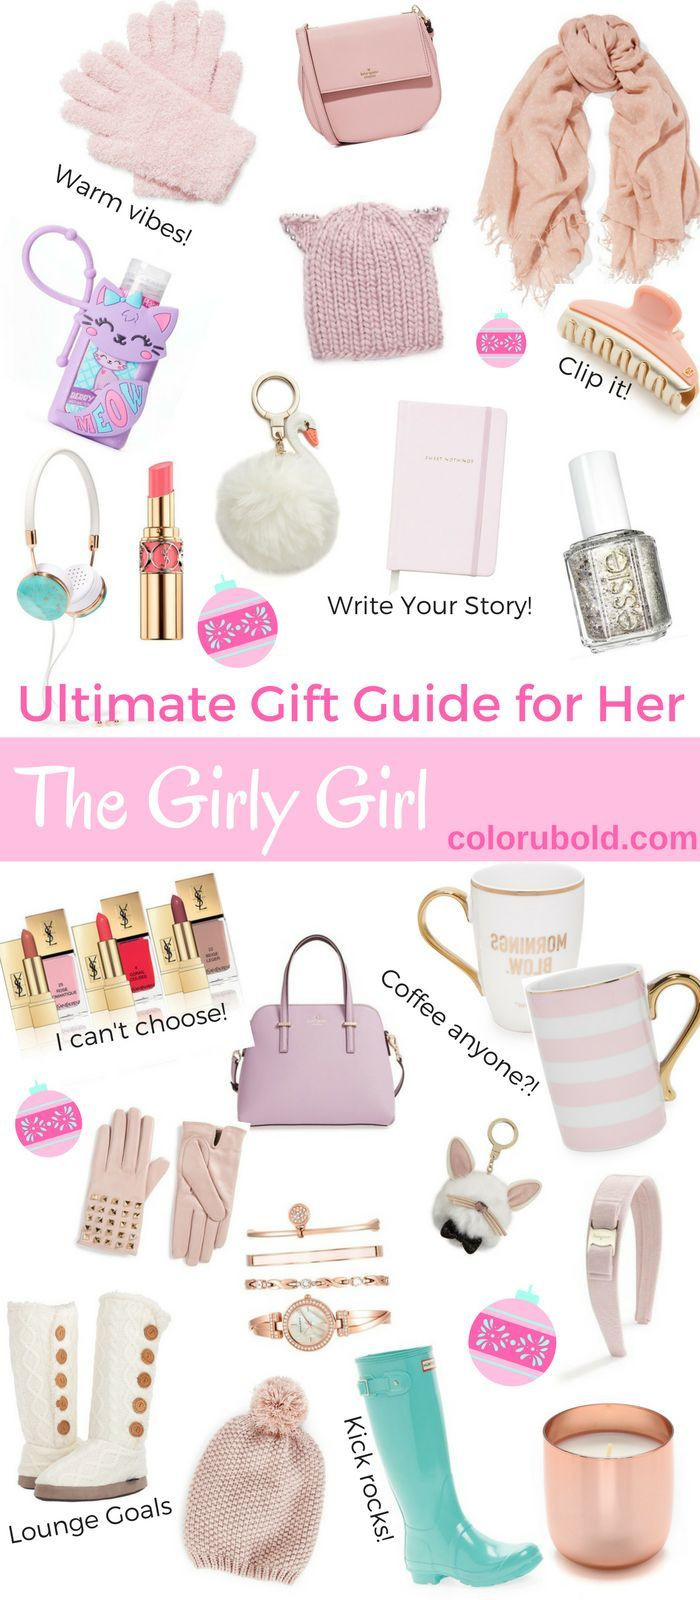 Birthday Gift Ideas For A Girl
 The Ultimate Gift Guide for the Girly Girl